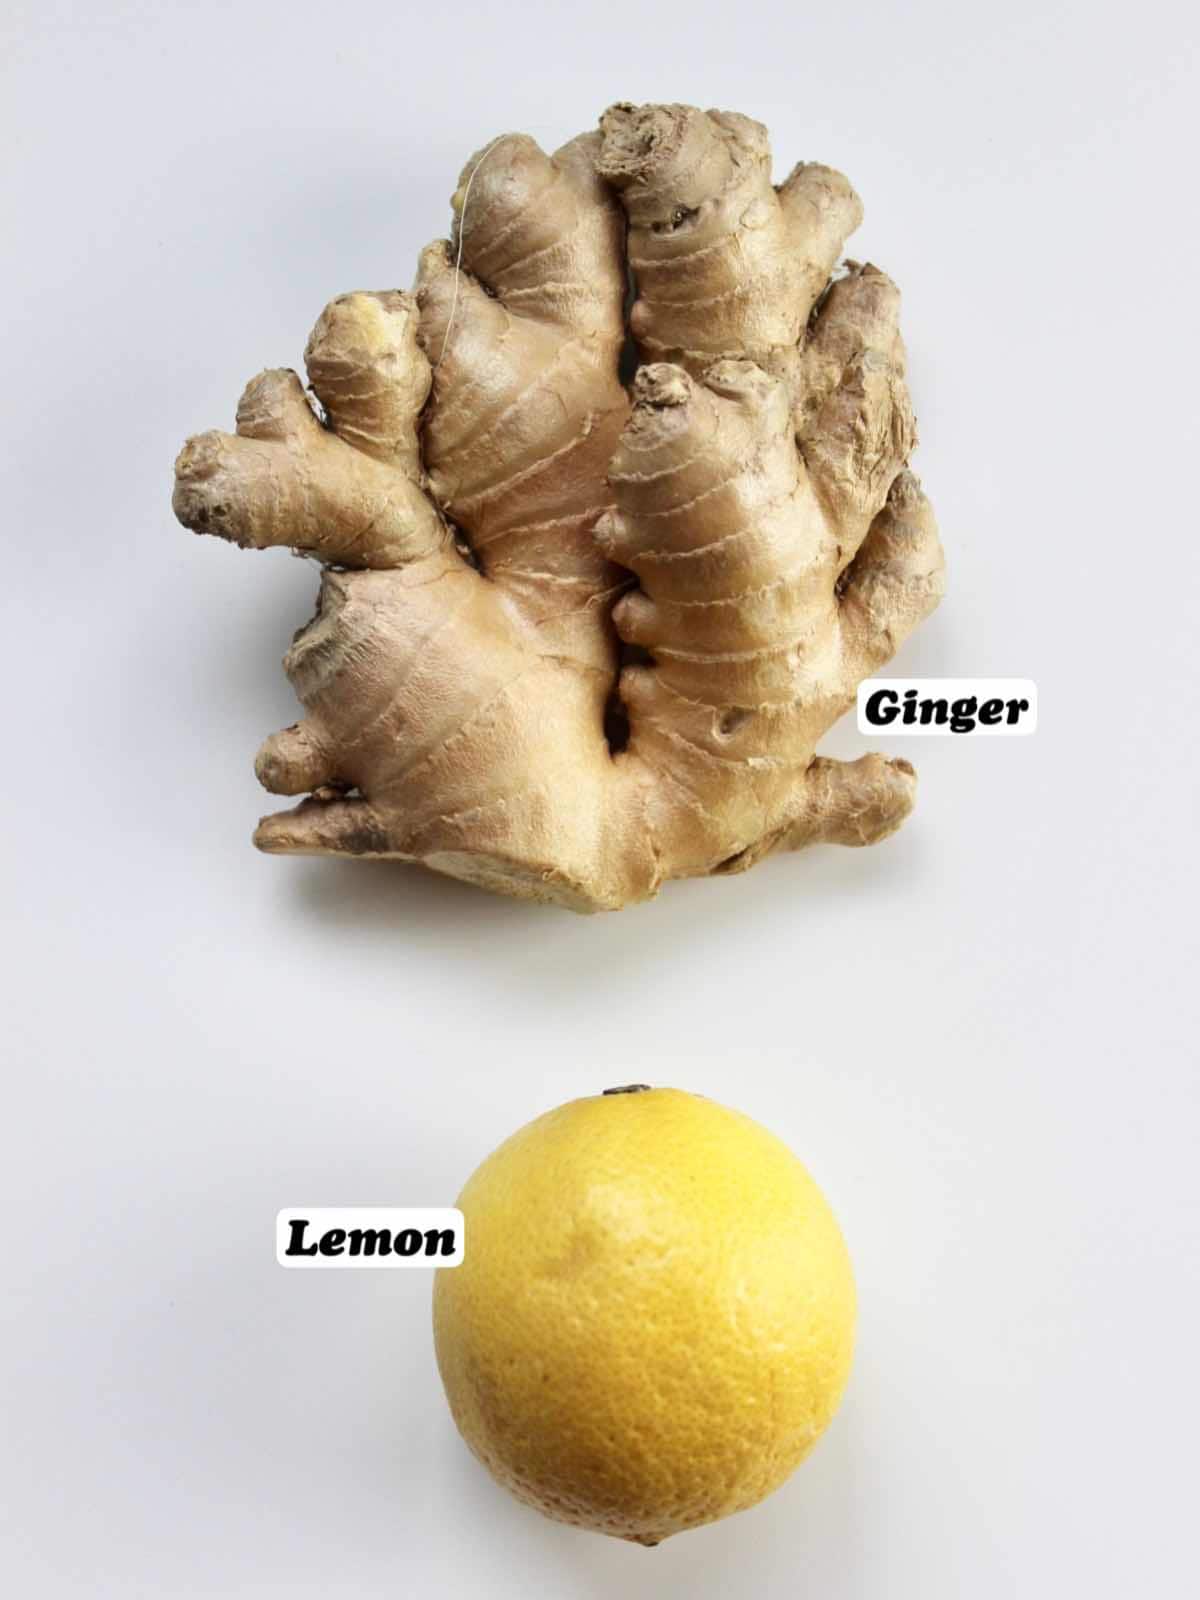 ingredients needed for homemade salabat ginger and lemon